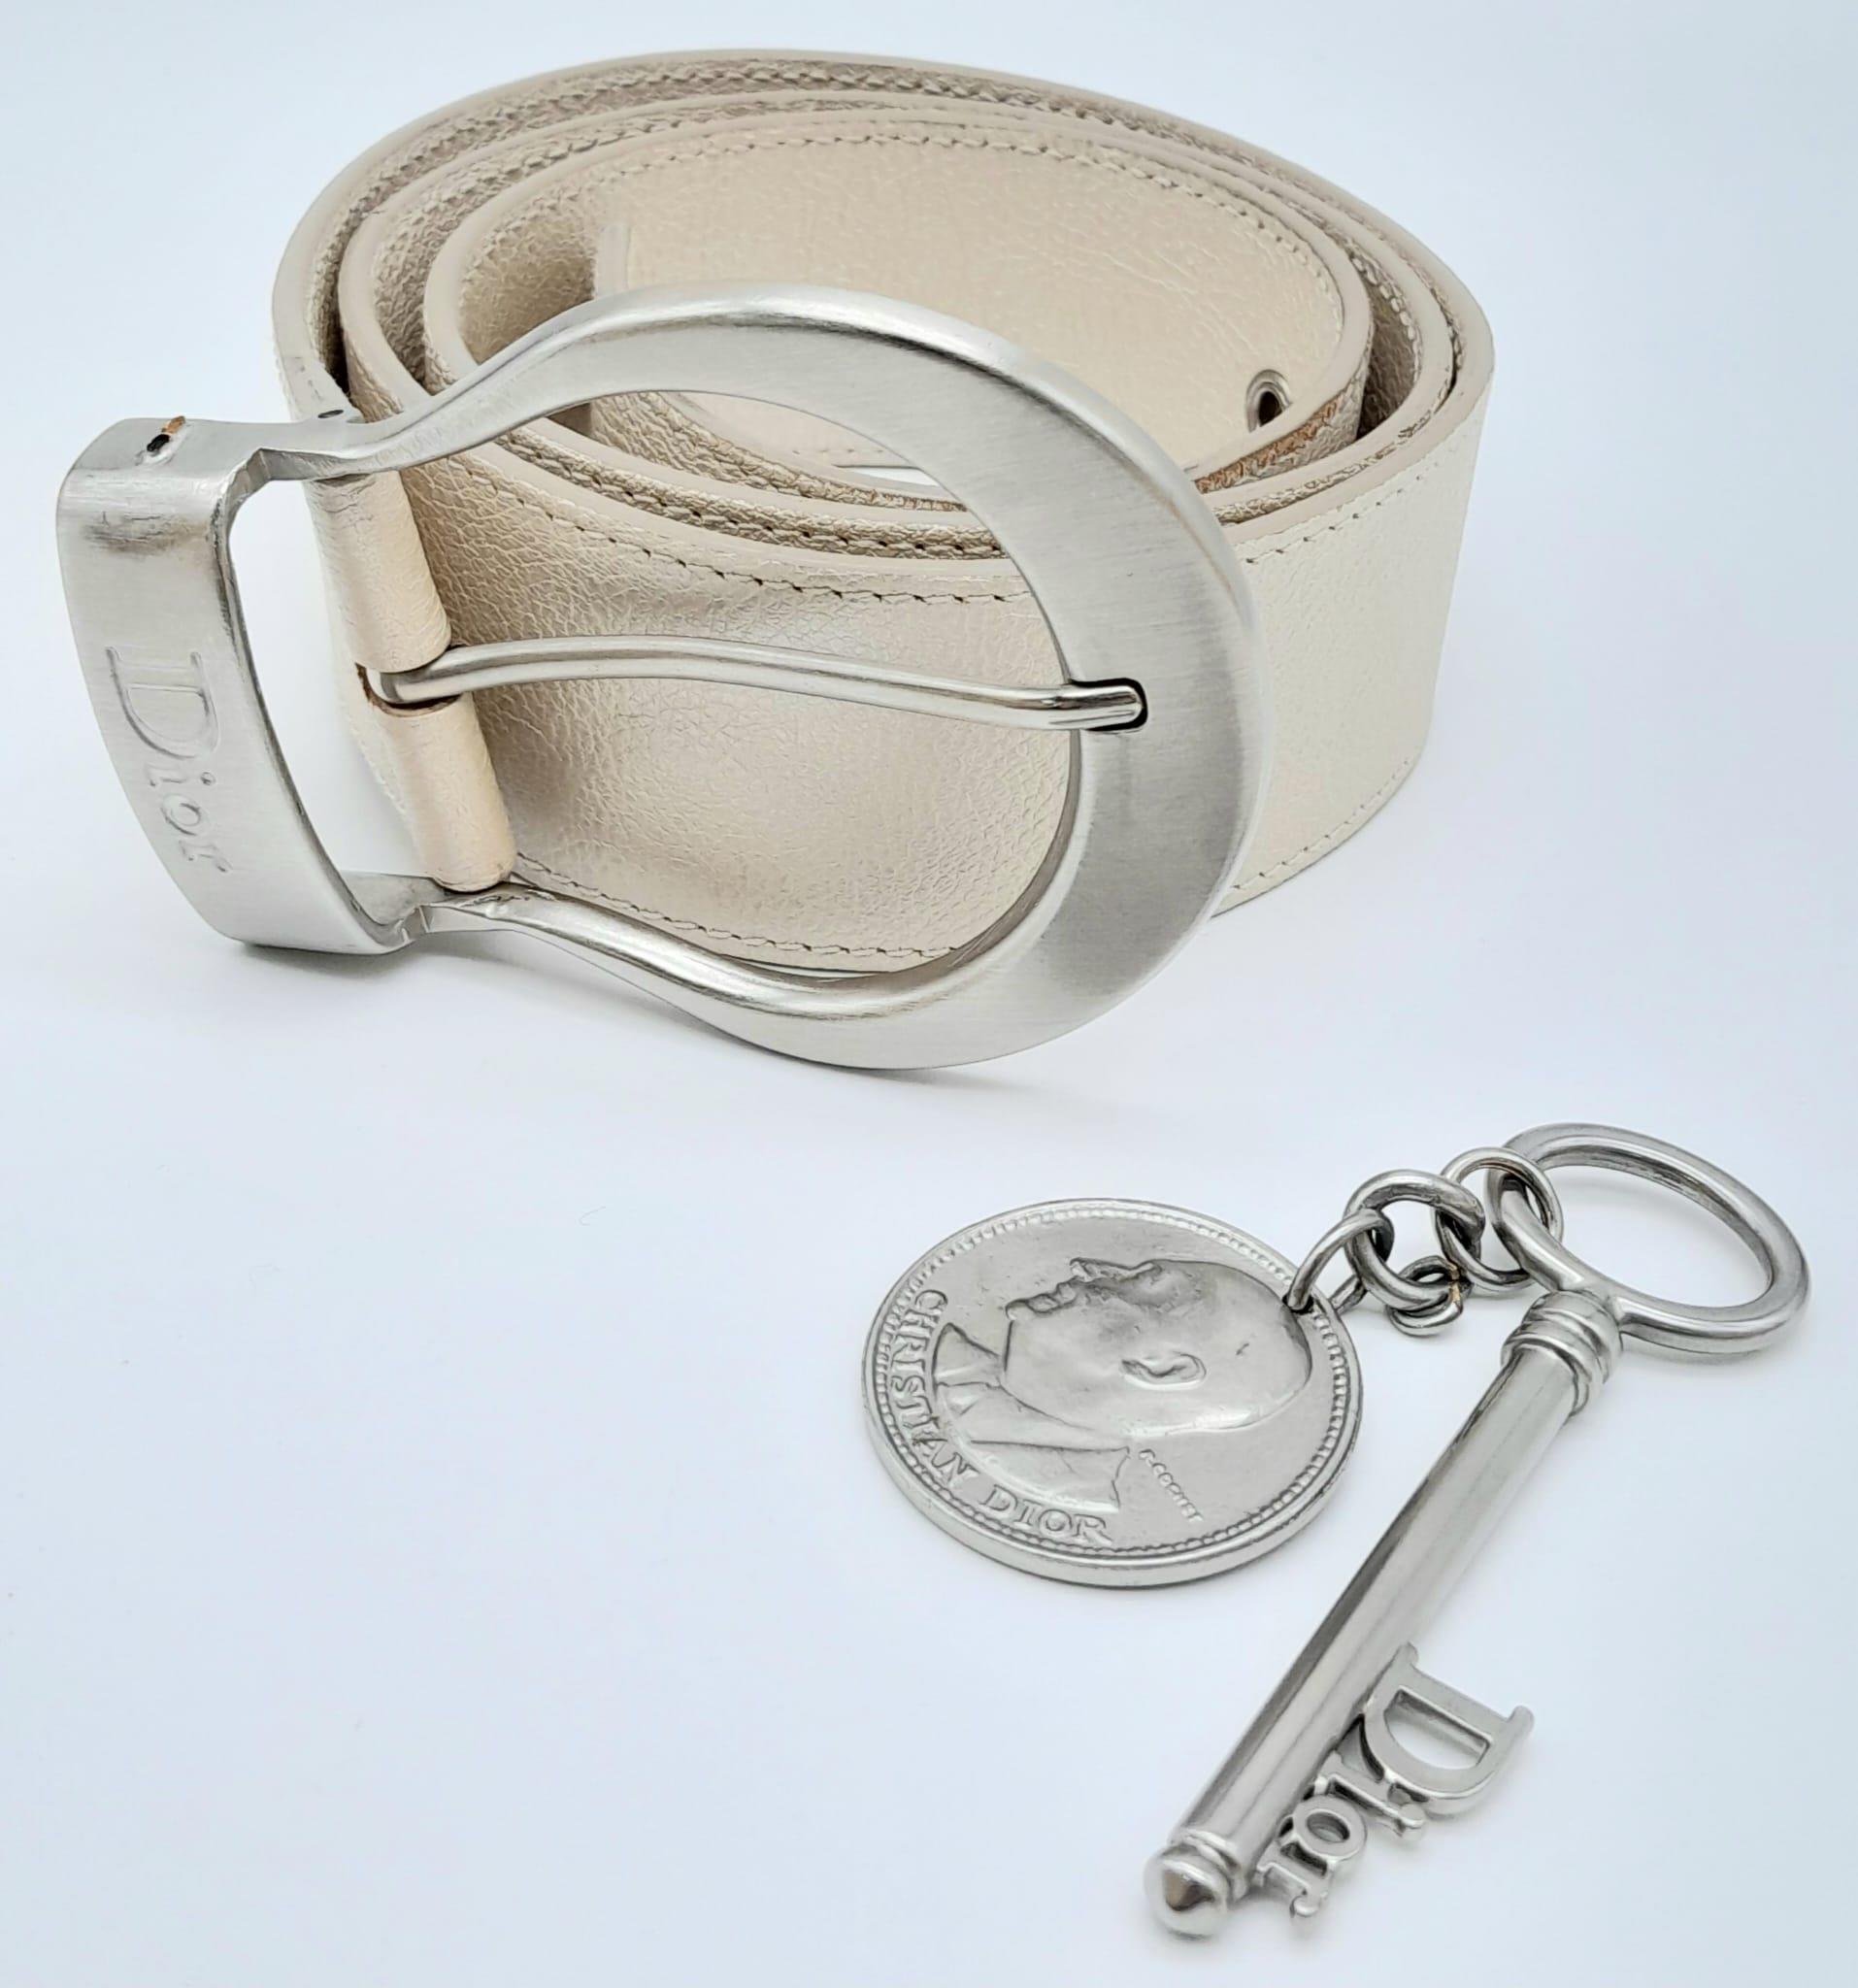 Stylish Christian Dior Leather Belt. Made in Italy, this pearlescent ivory white CD belt measures